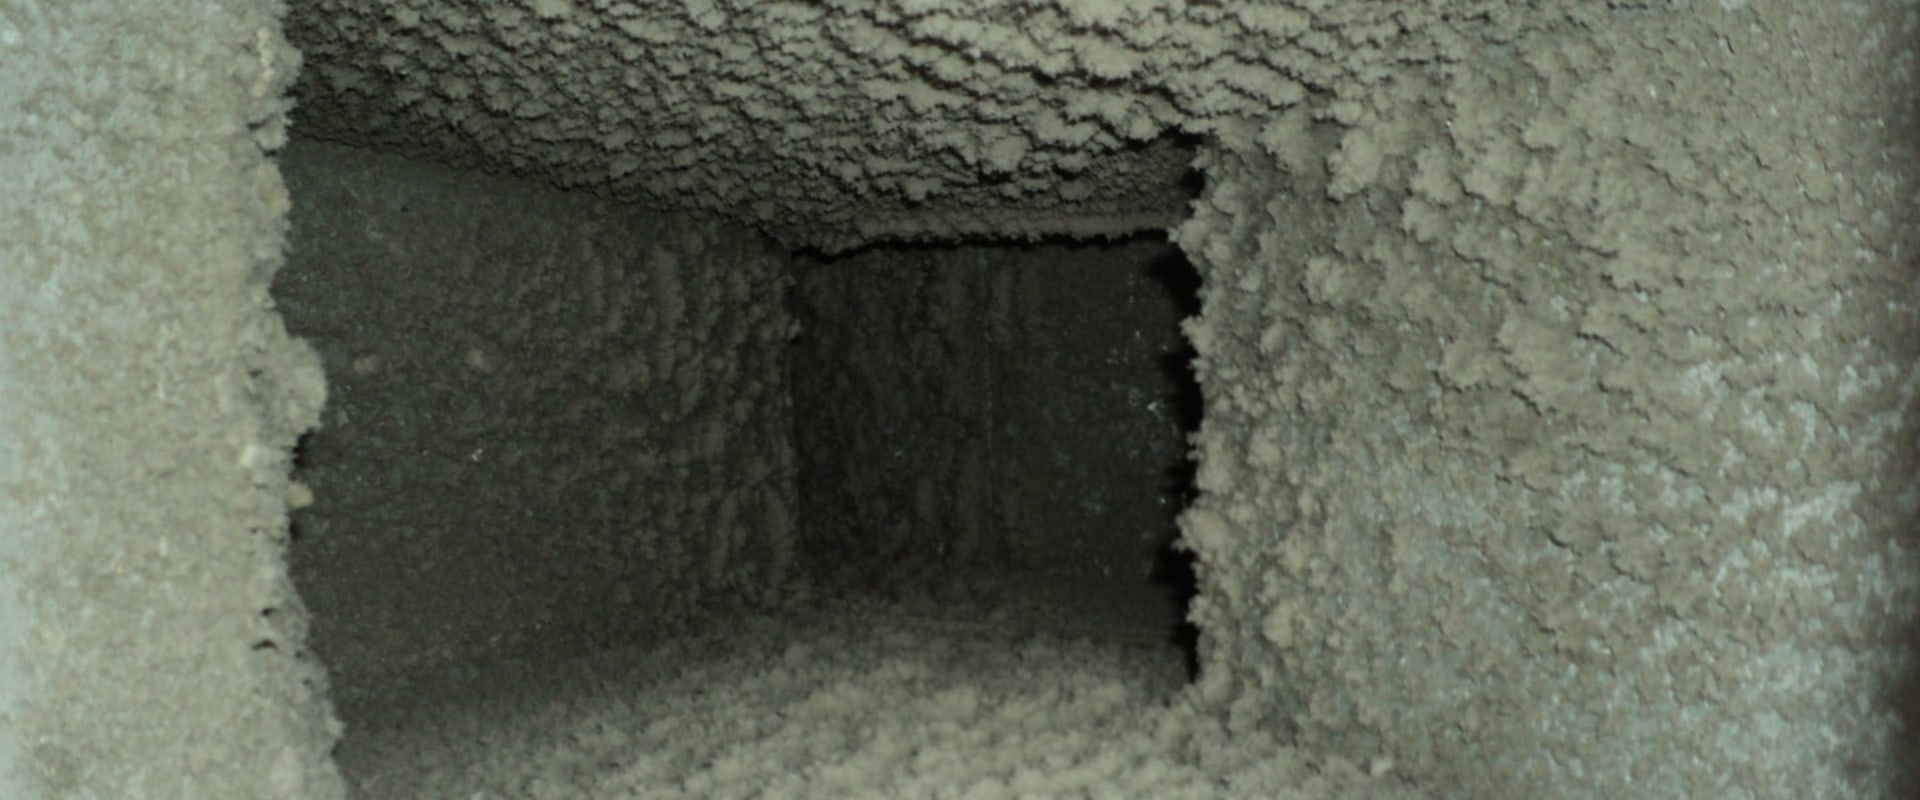 Special Techniques for Professional Duct Repair in Pompano Beach, FL